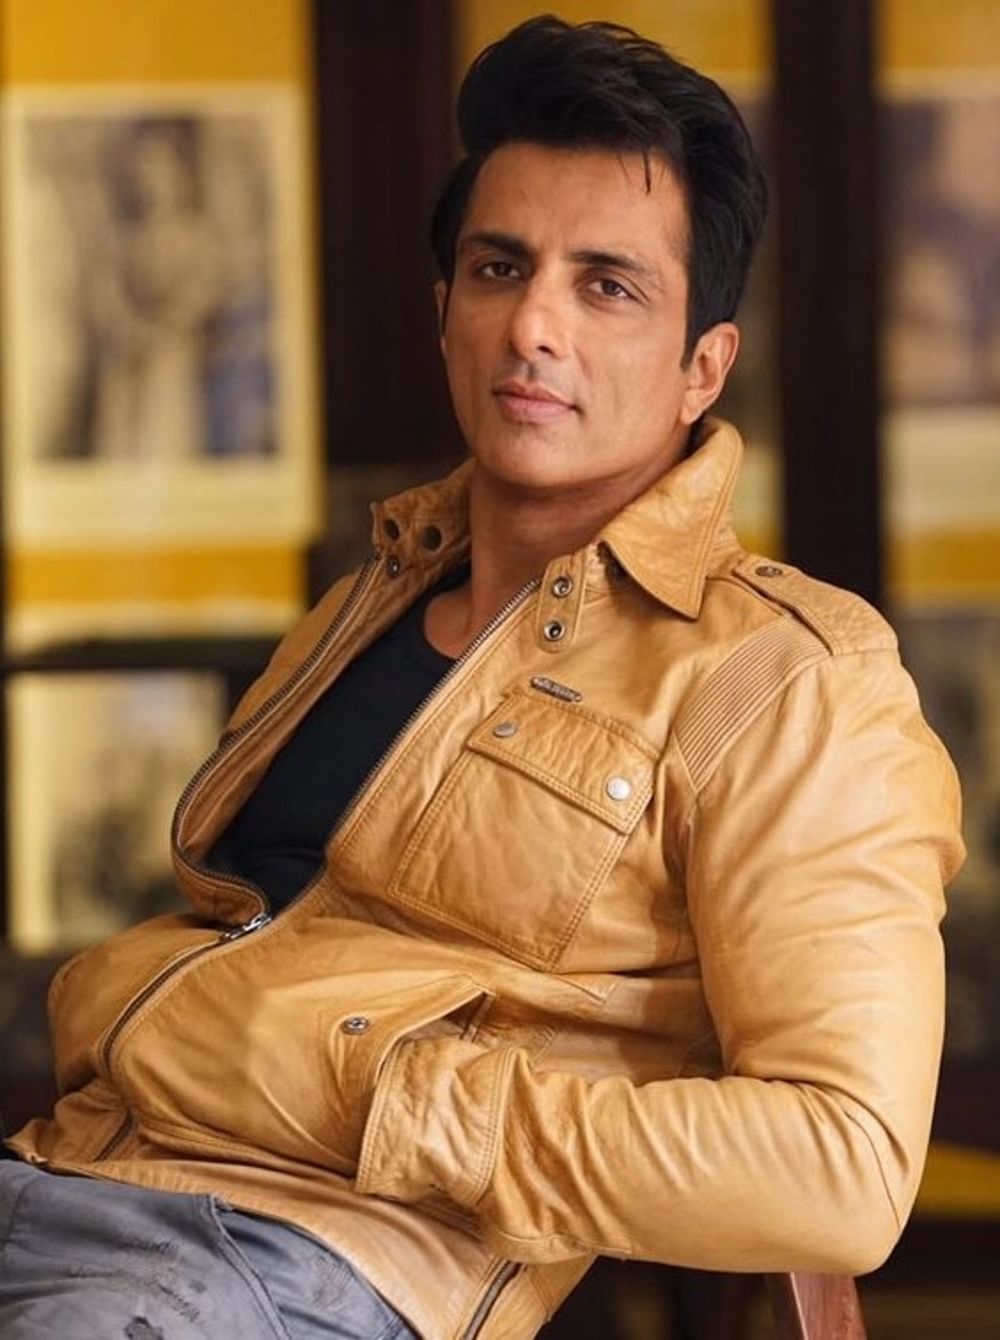 Actor Sonu Sood pledges support for over 400 families of deceased, injured migrants